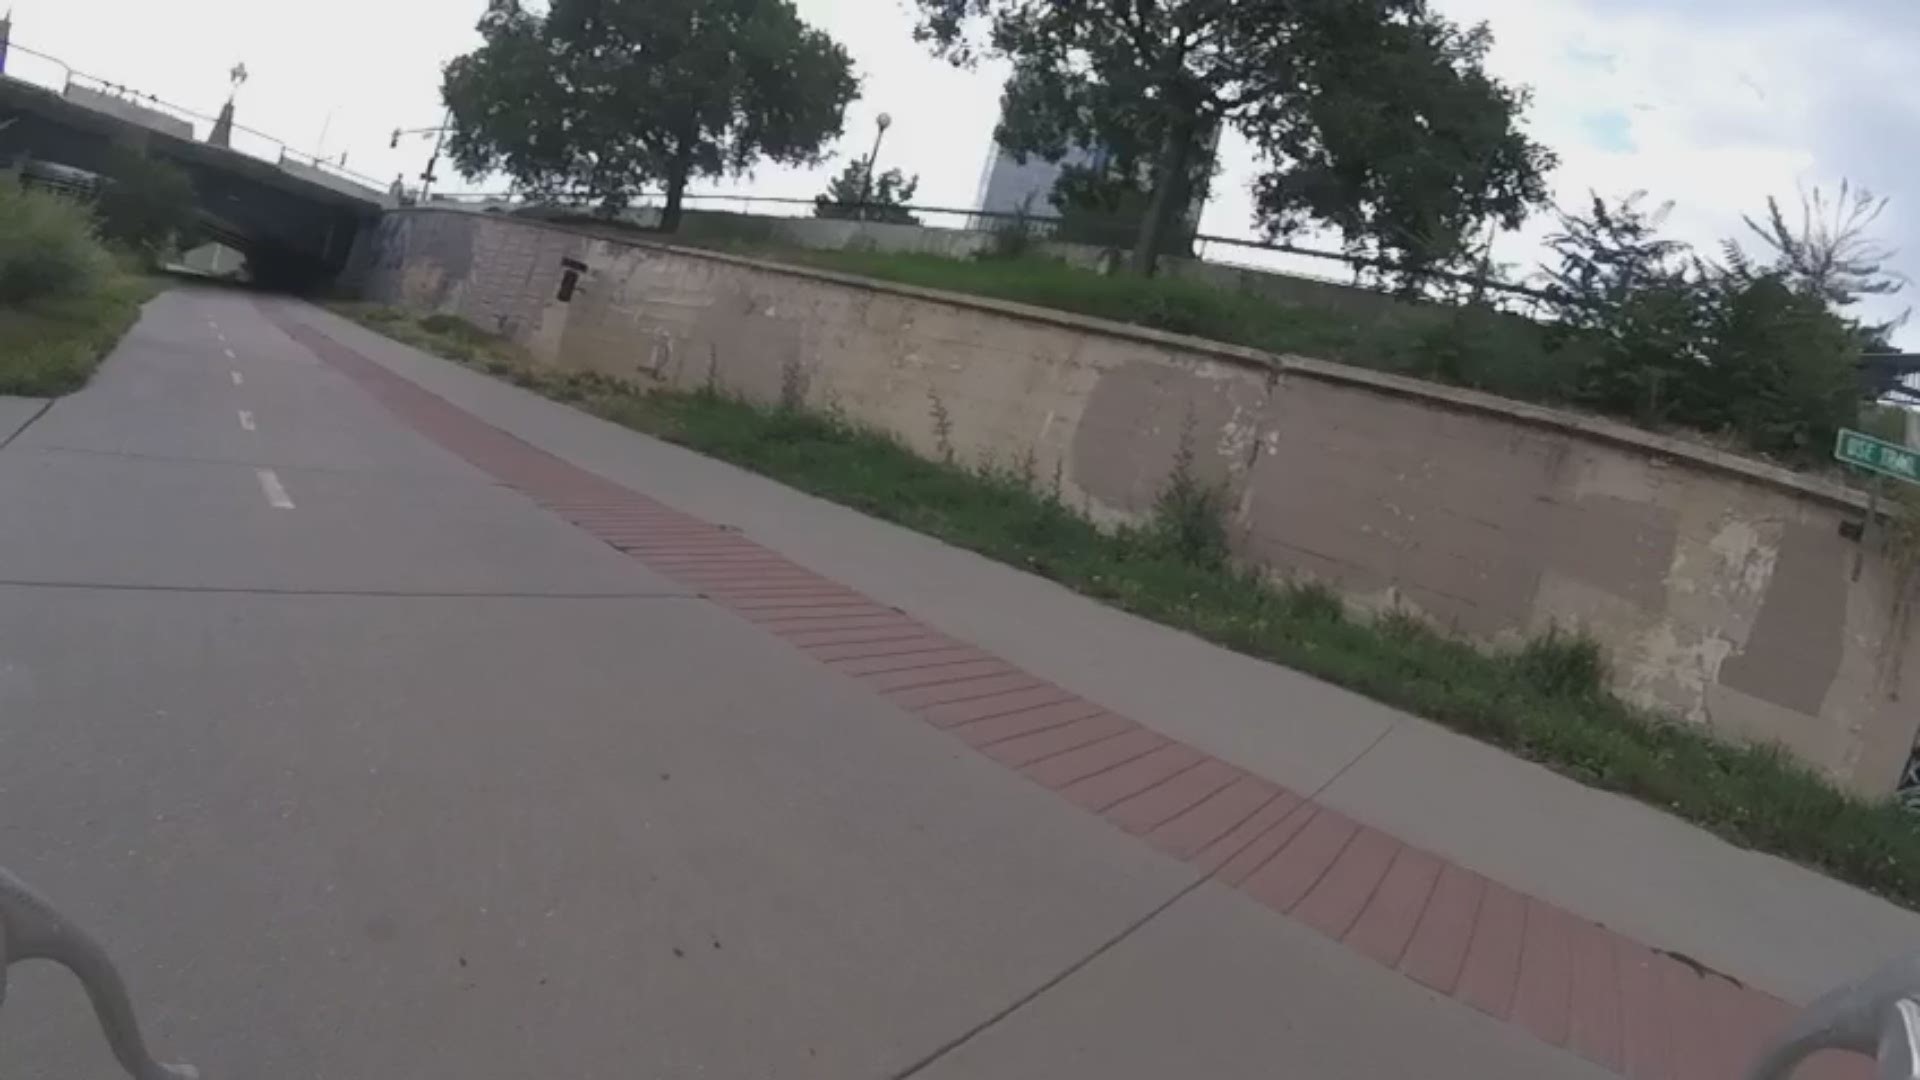 Watch this timelapse of a bike ride on the Cherry Creek bike path to Confluence Park in Denver.